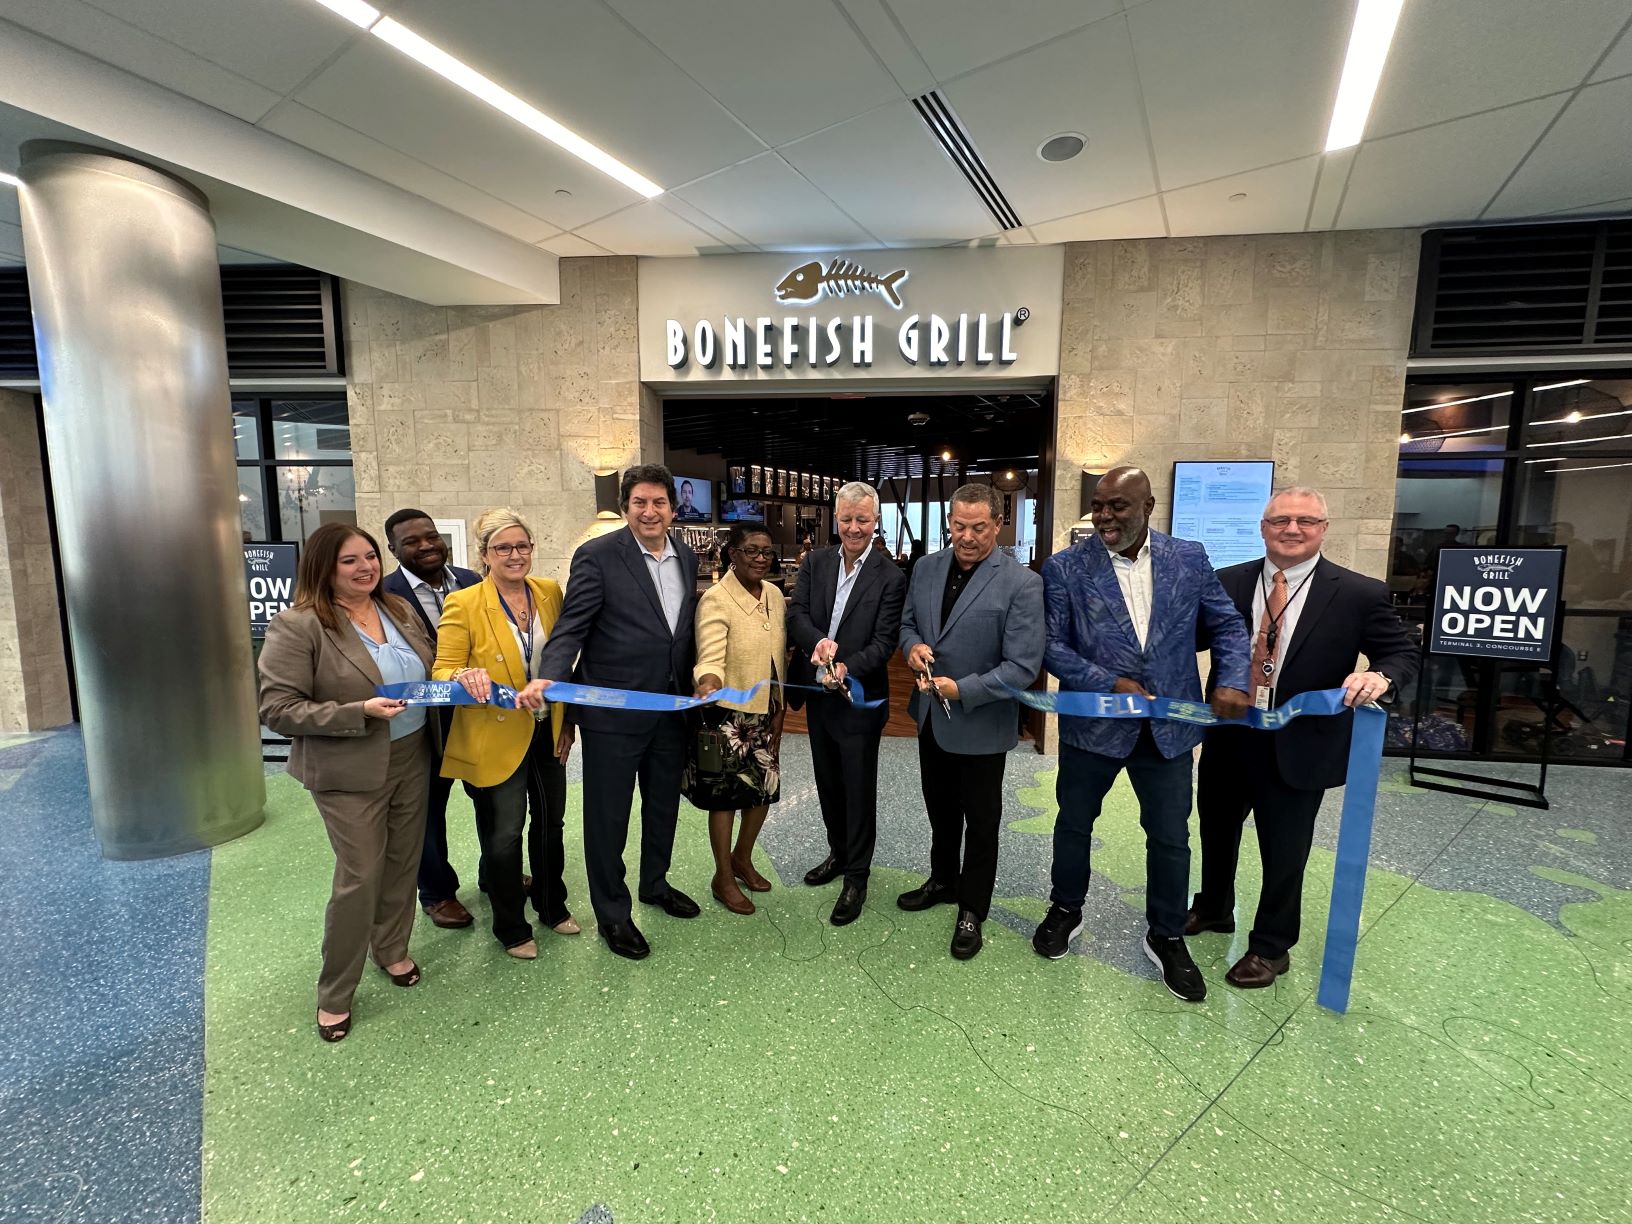 FLL, Delaware North, and Broward County Government officials participate in the ribbon-cutting ceremony for the airport's new Bonefish Grill restaurant.